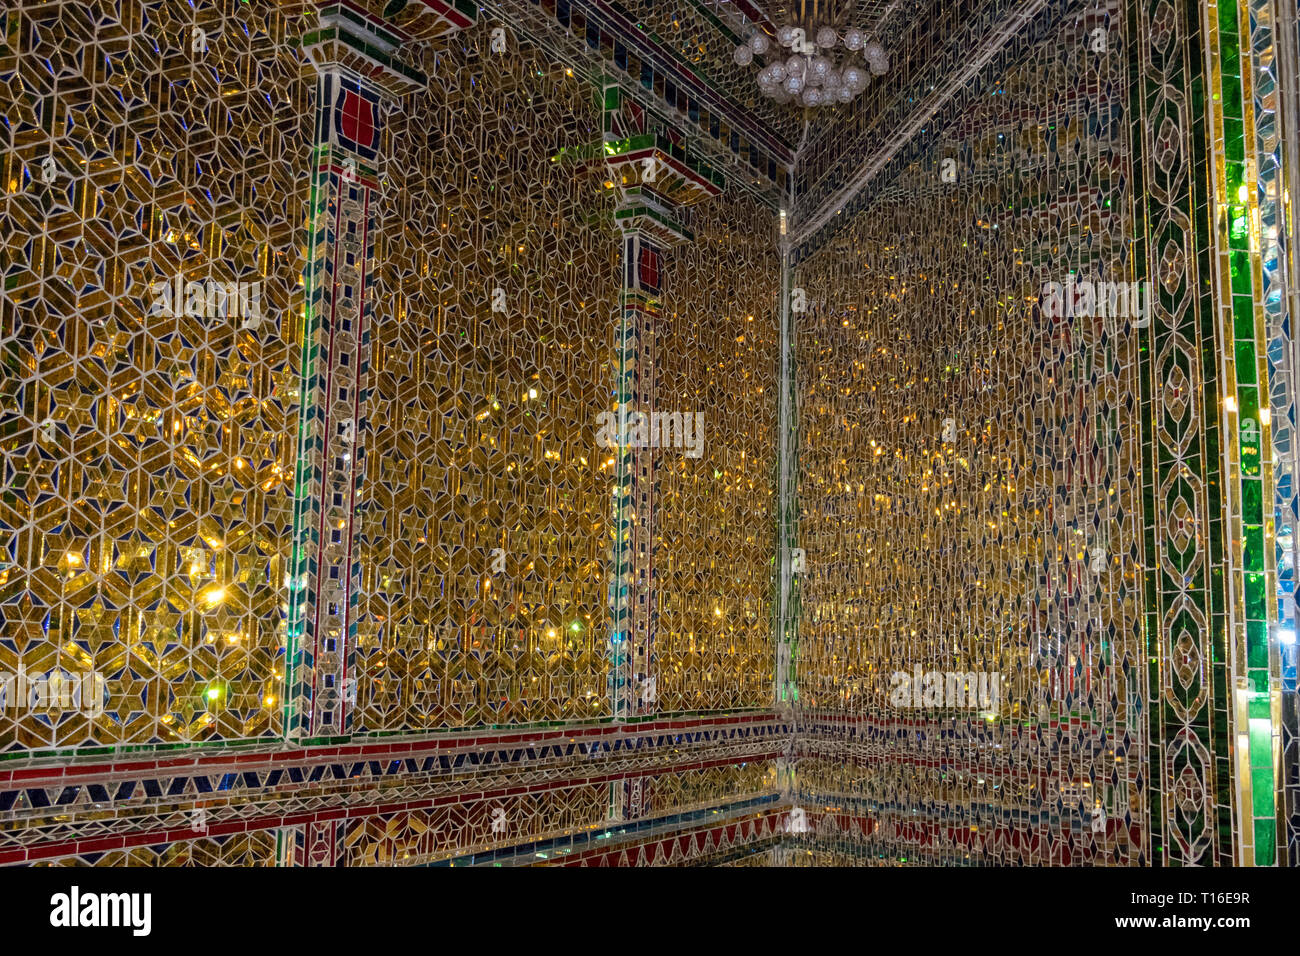 The unique Arulmigu Sri Rajakaliamman Glass Temple in Johor Bahru, Malaysia. The interior is completely covered in glass tiles. Glittery interior. Stock Photo